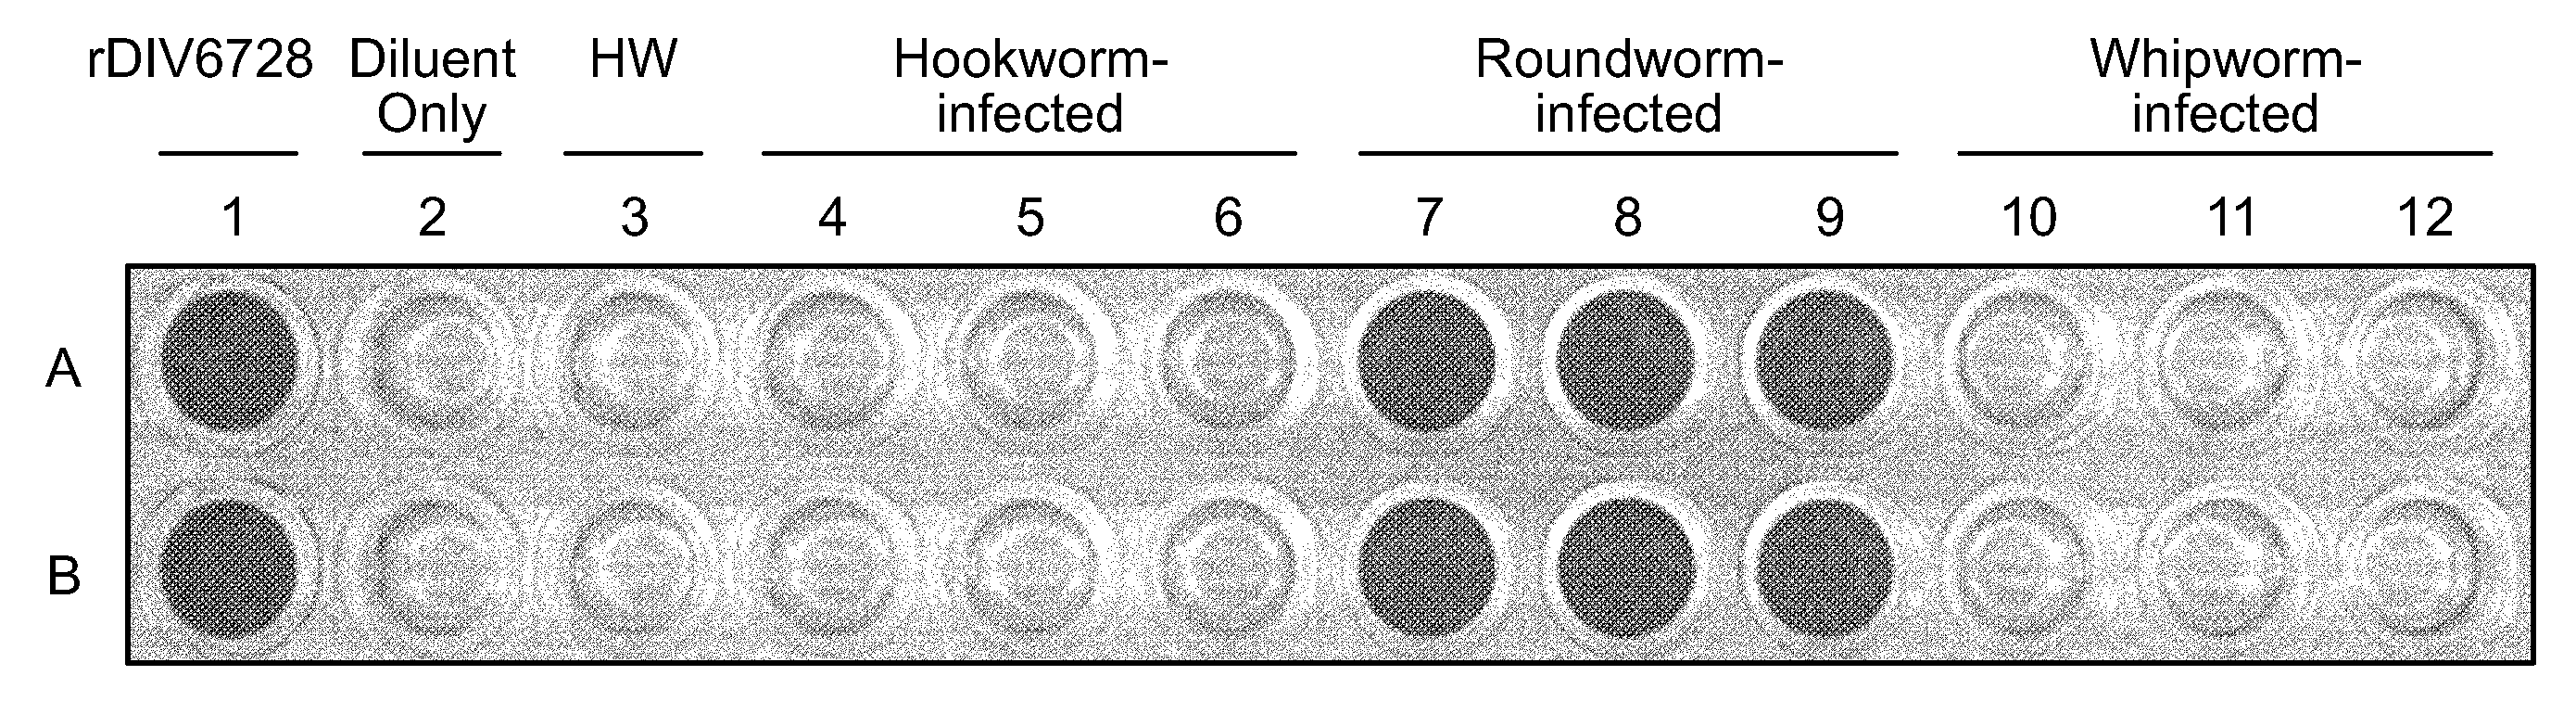 Methods, Devices, Kits and Compositions for Detecting Roundworm